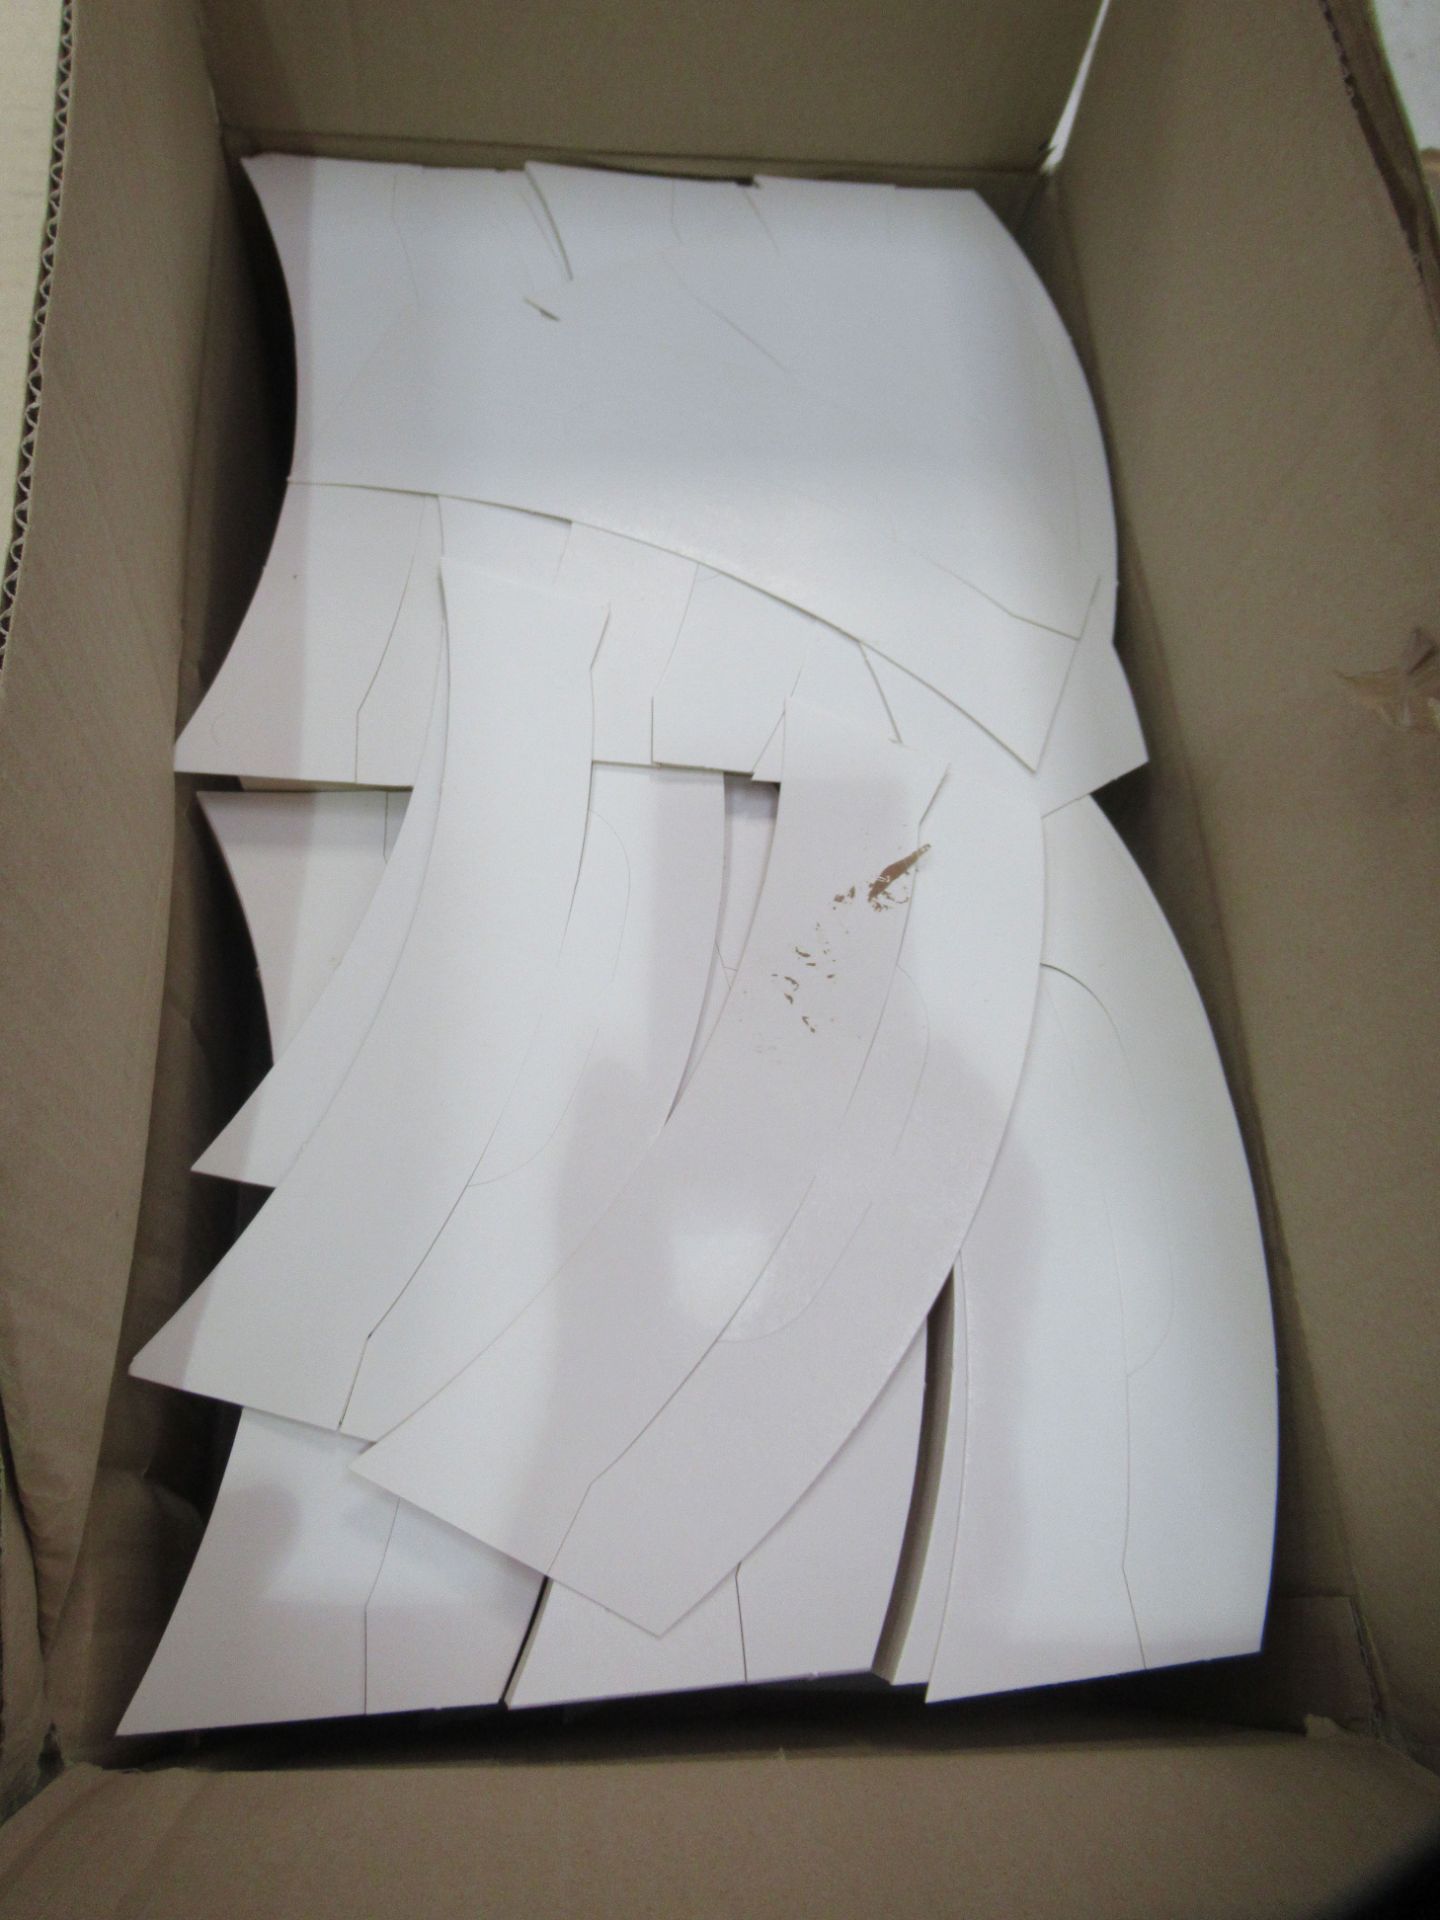 15x Reels of White Calendar Tape, 9x White Coats in size 104, Approx. 4000x Shirts Card Collars and - Image 8 of 10